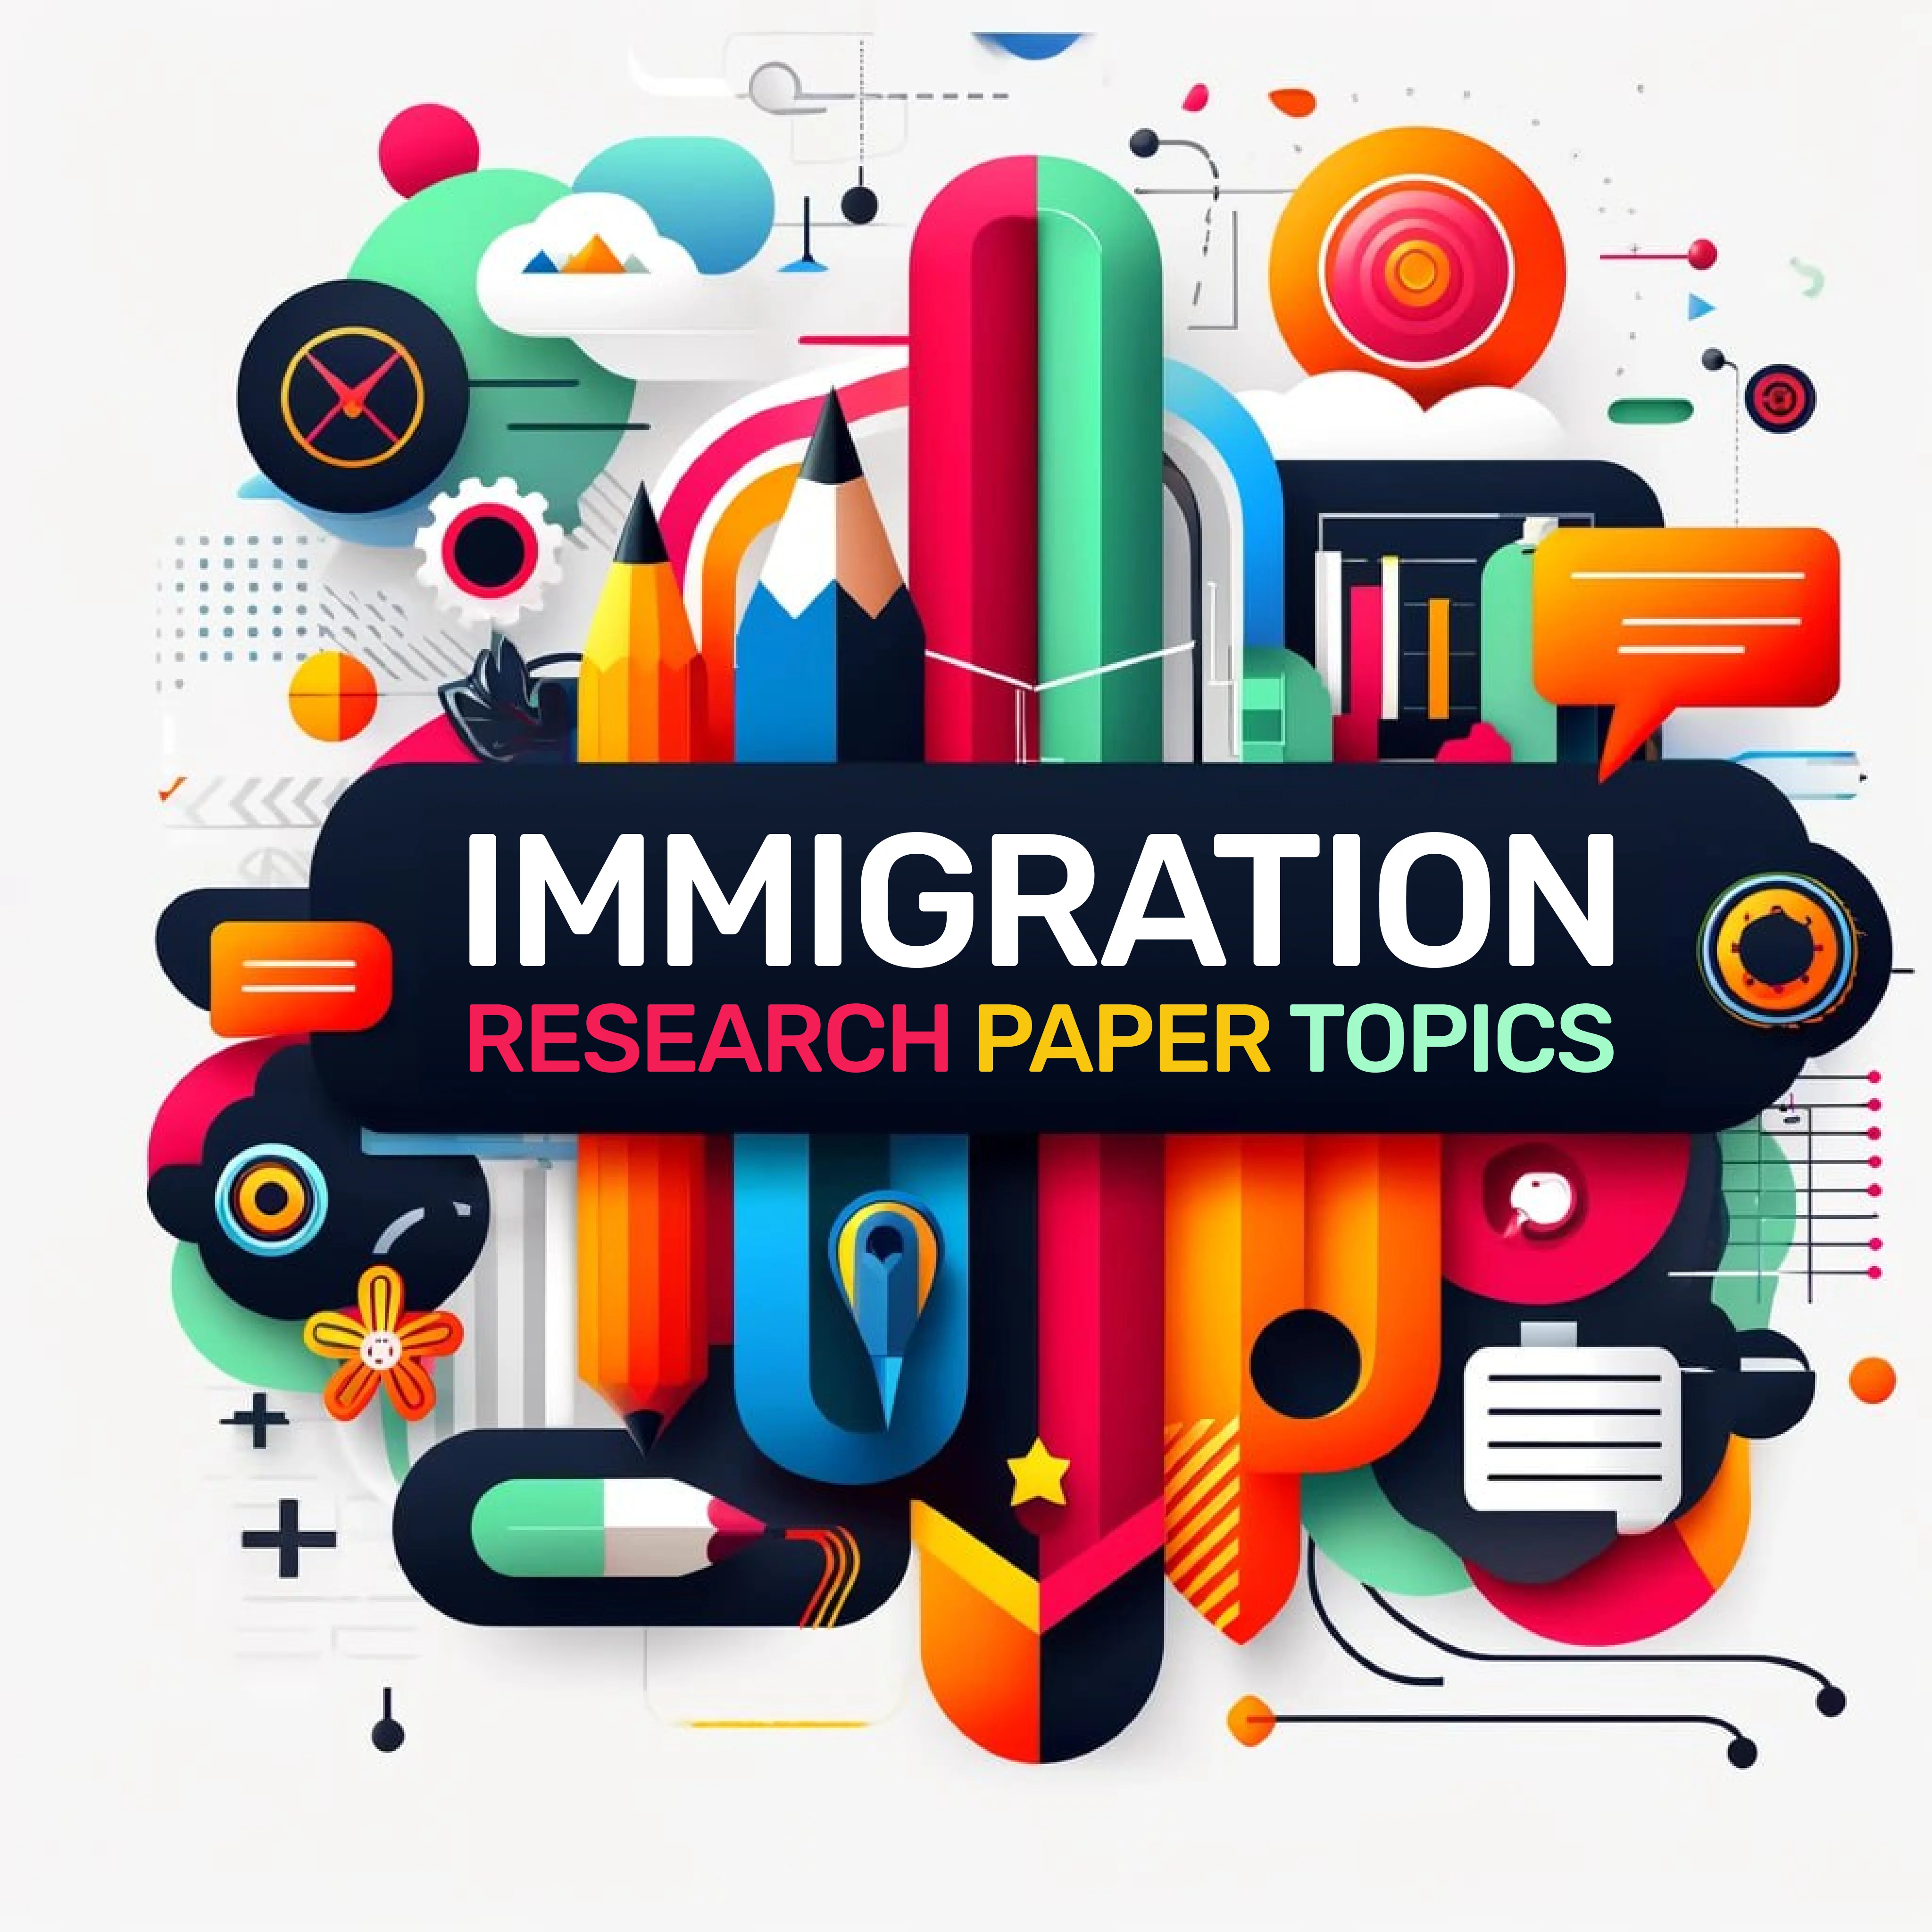 Research questions about immigration: how to create an influential paper